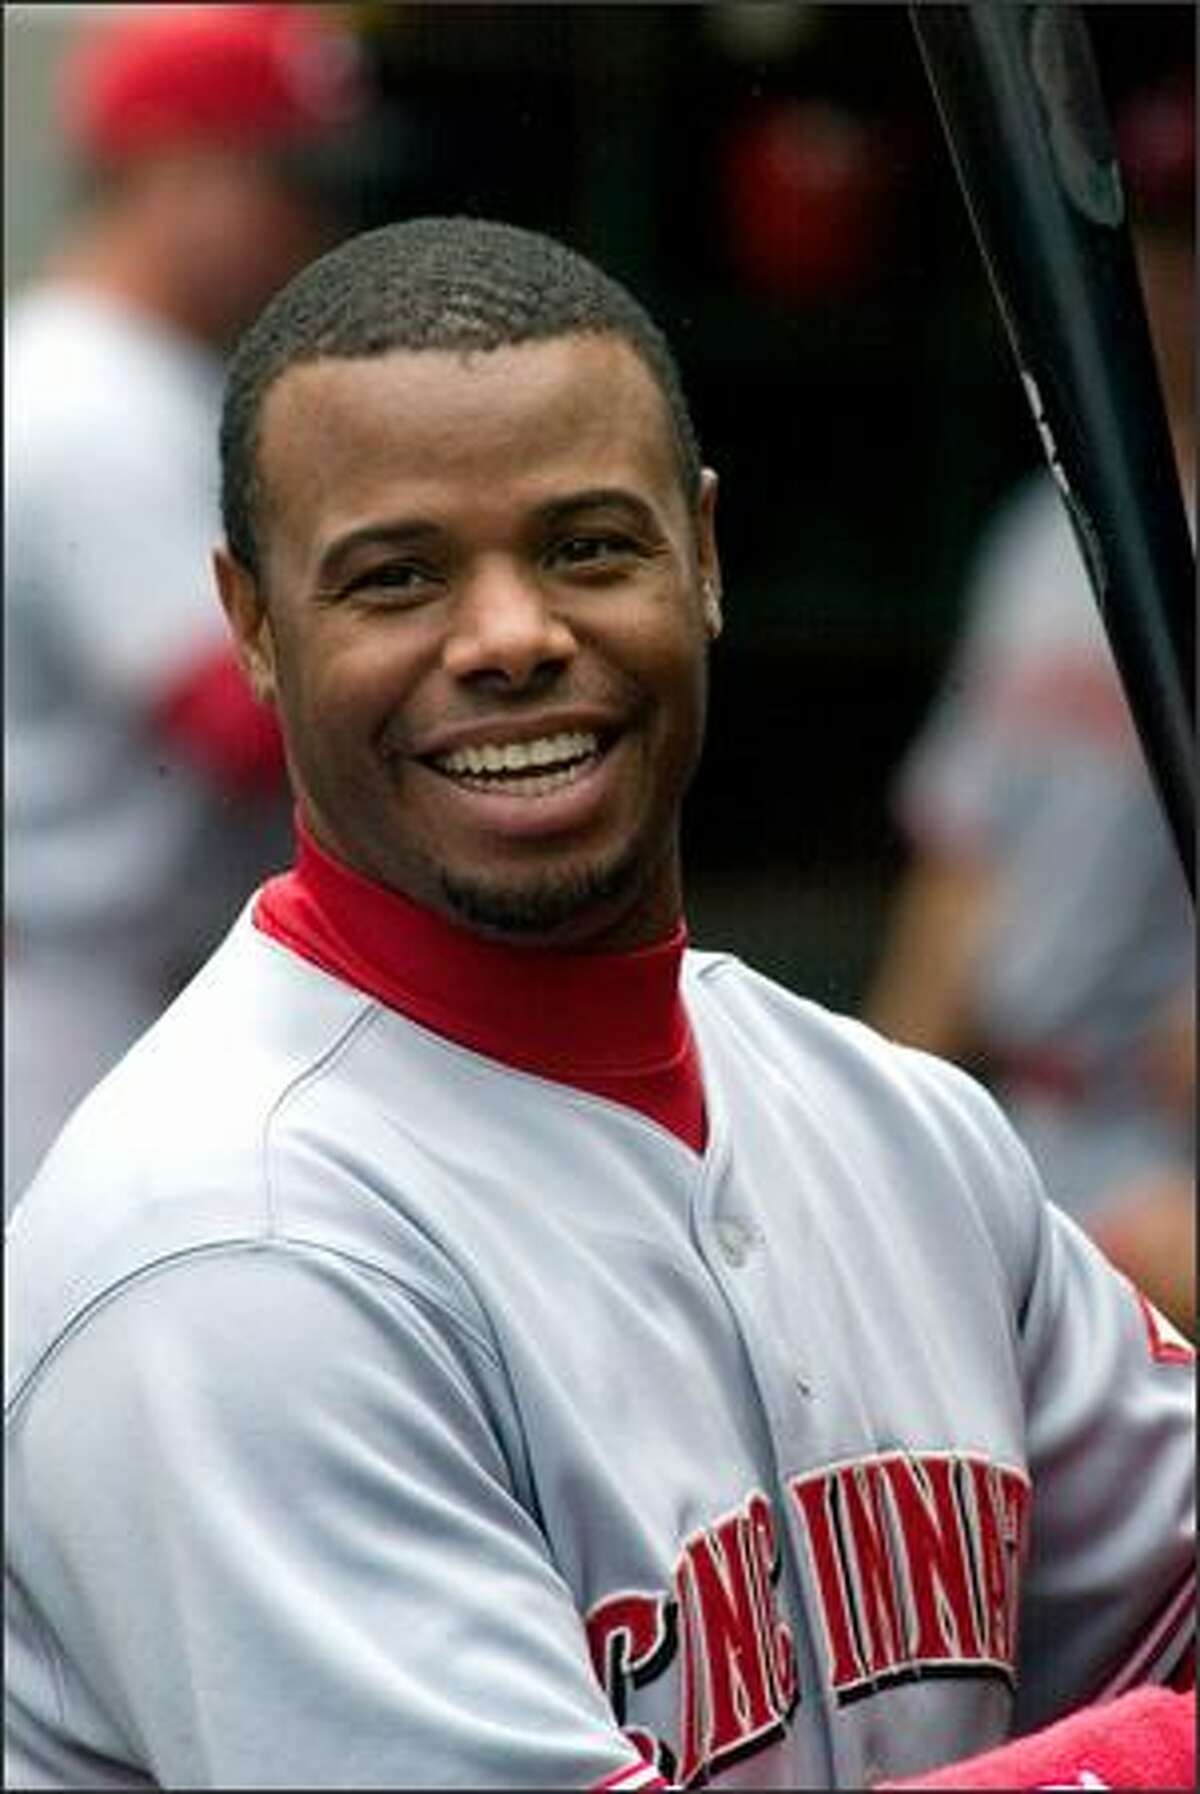 Ken Griffey Jr., smiles before his team, the Cincinnati Reds, take the field against the Mariners.